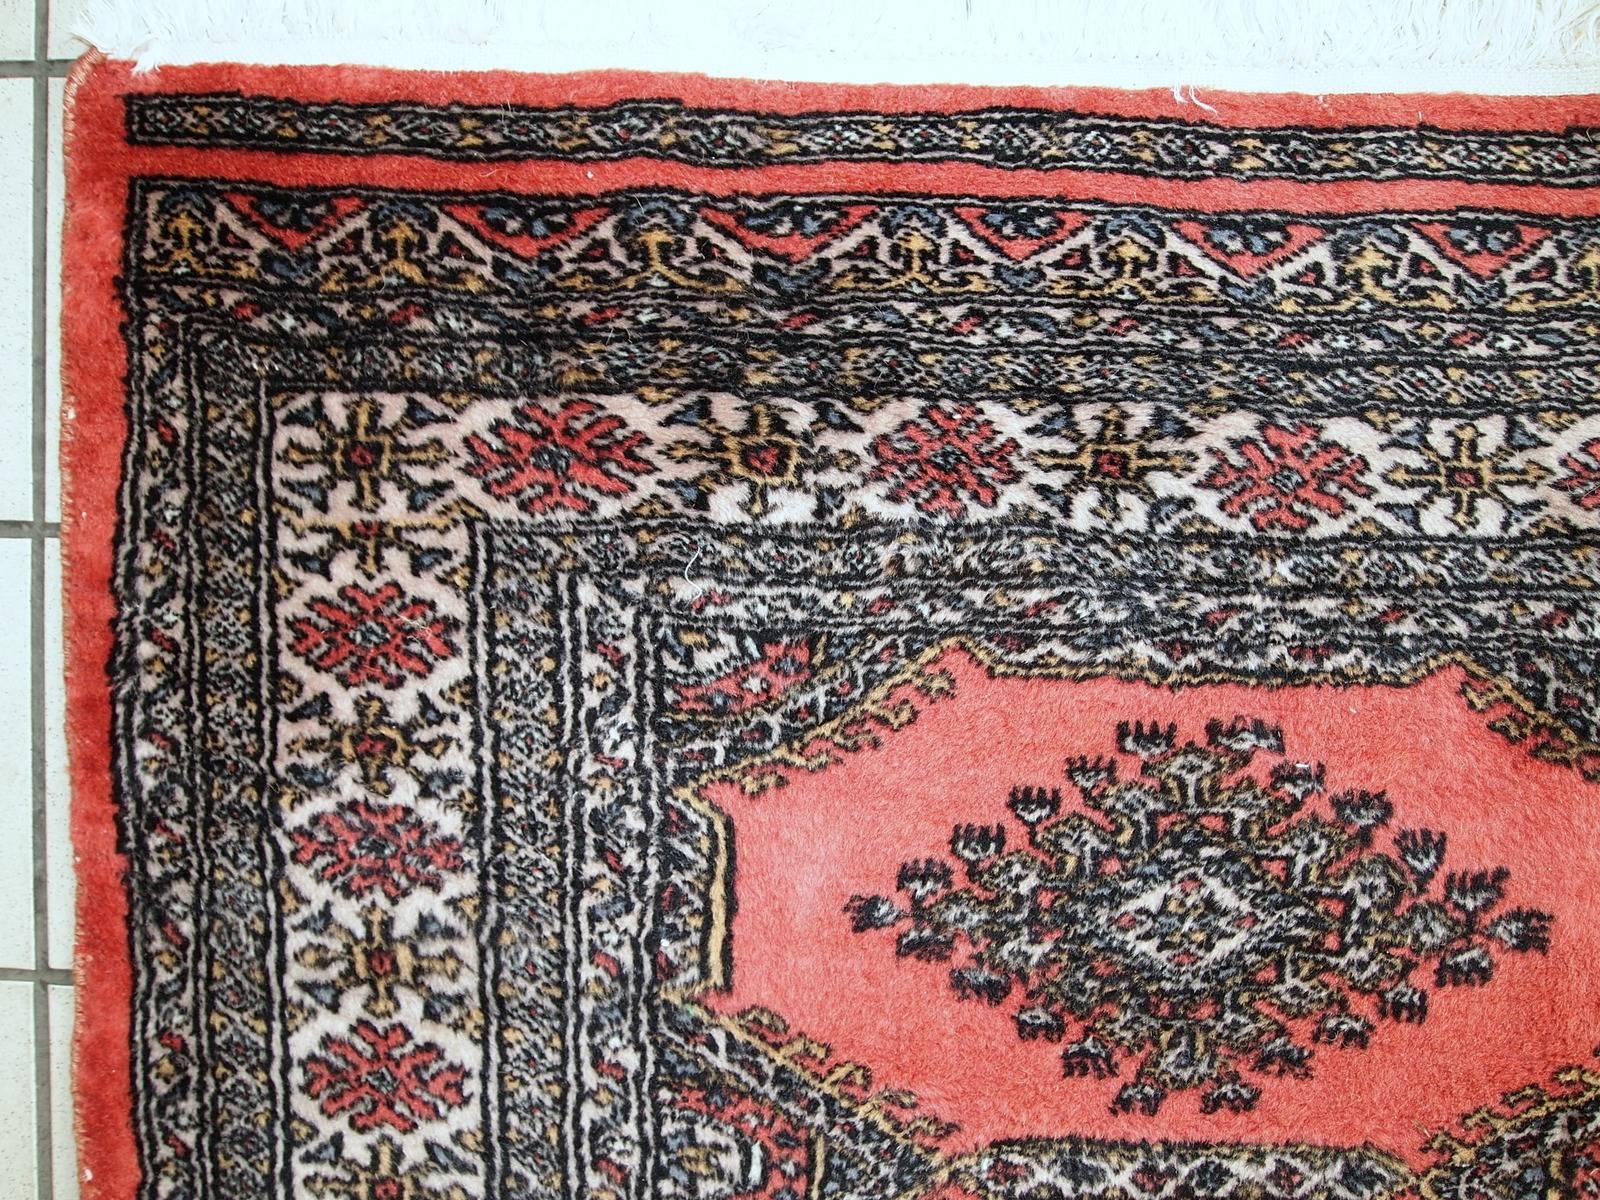 Vintage handmade Uzbek Bukhara rug in original condition. The rug made in classic Bukhara design. Peach filed decorated with five diamond shaped medallions. The border is in colourful shades and has very busy design. The rug is in original good